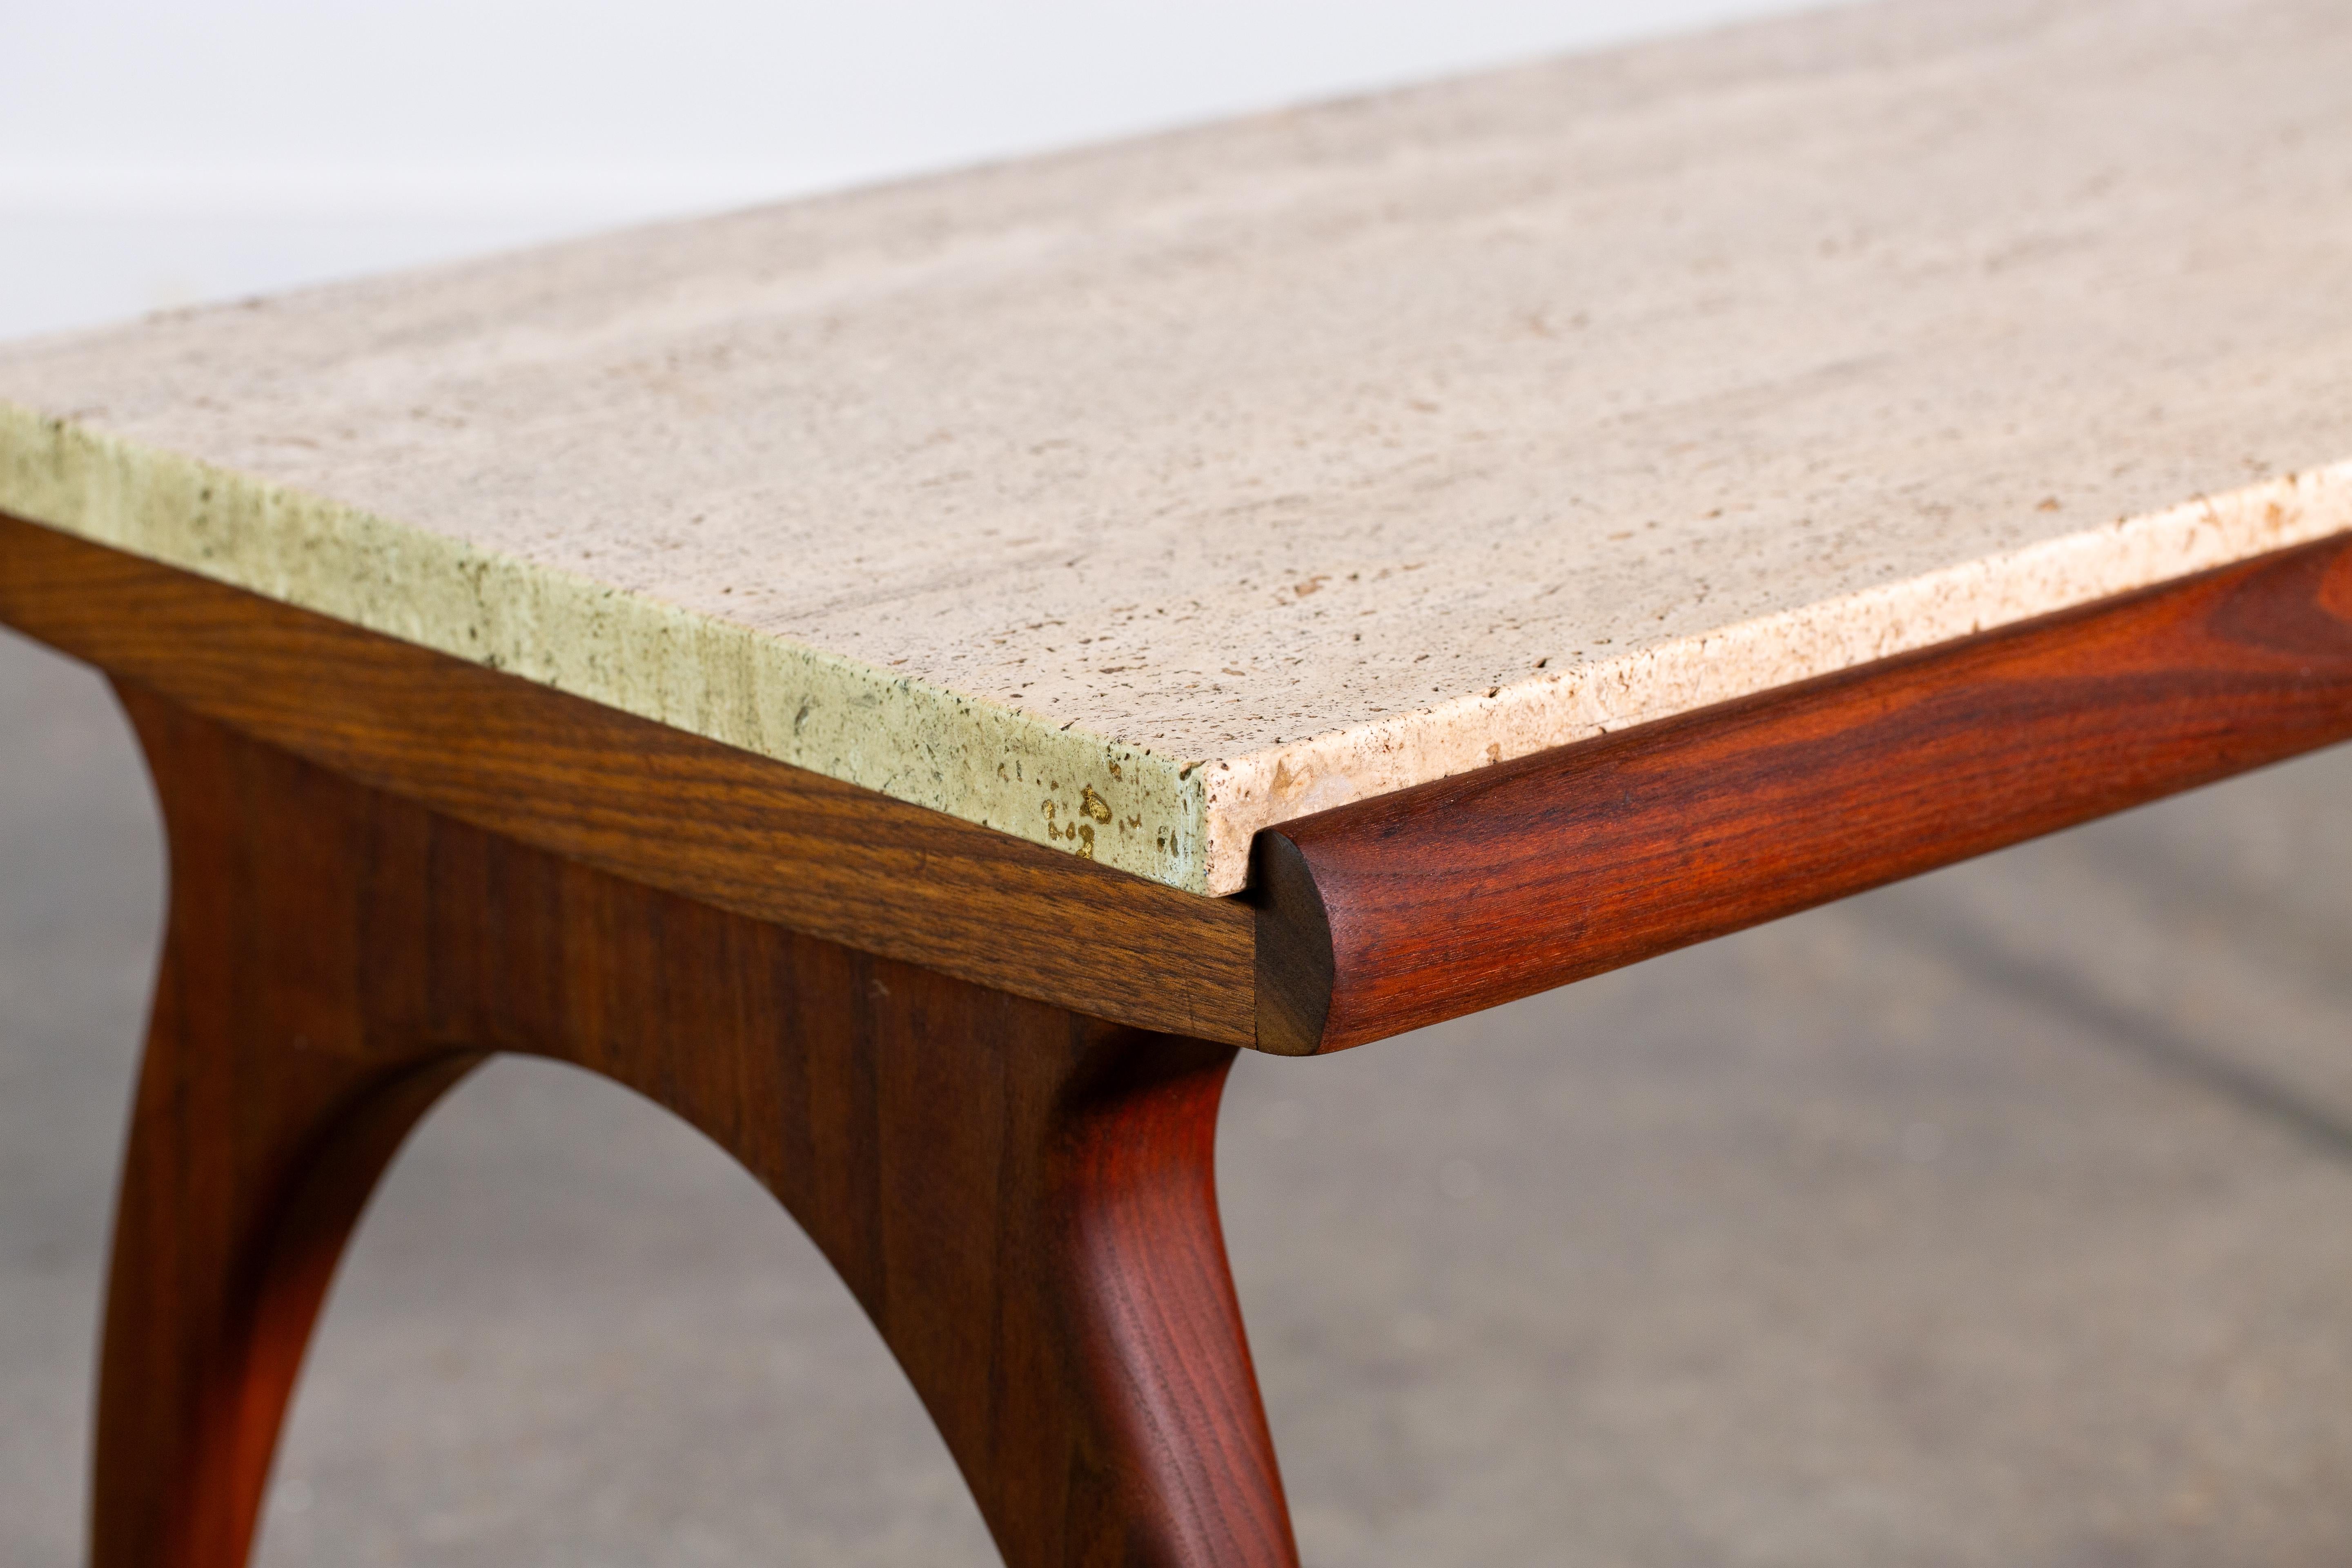 A Bertha Schaefer for M. Singer Sons Occasional table.  The natural travertine marble supported by sculptural walnut legs. A rolled lip keeps the travertine in place and mimics the arched curve of the legs.  The walnut is a gorgeous Italian walnut